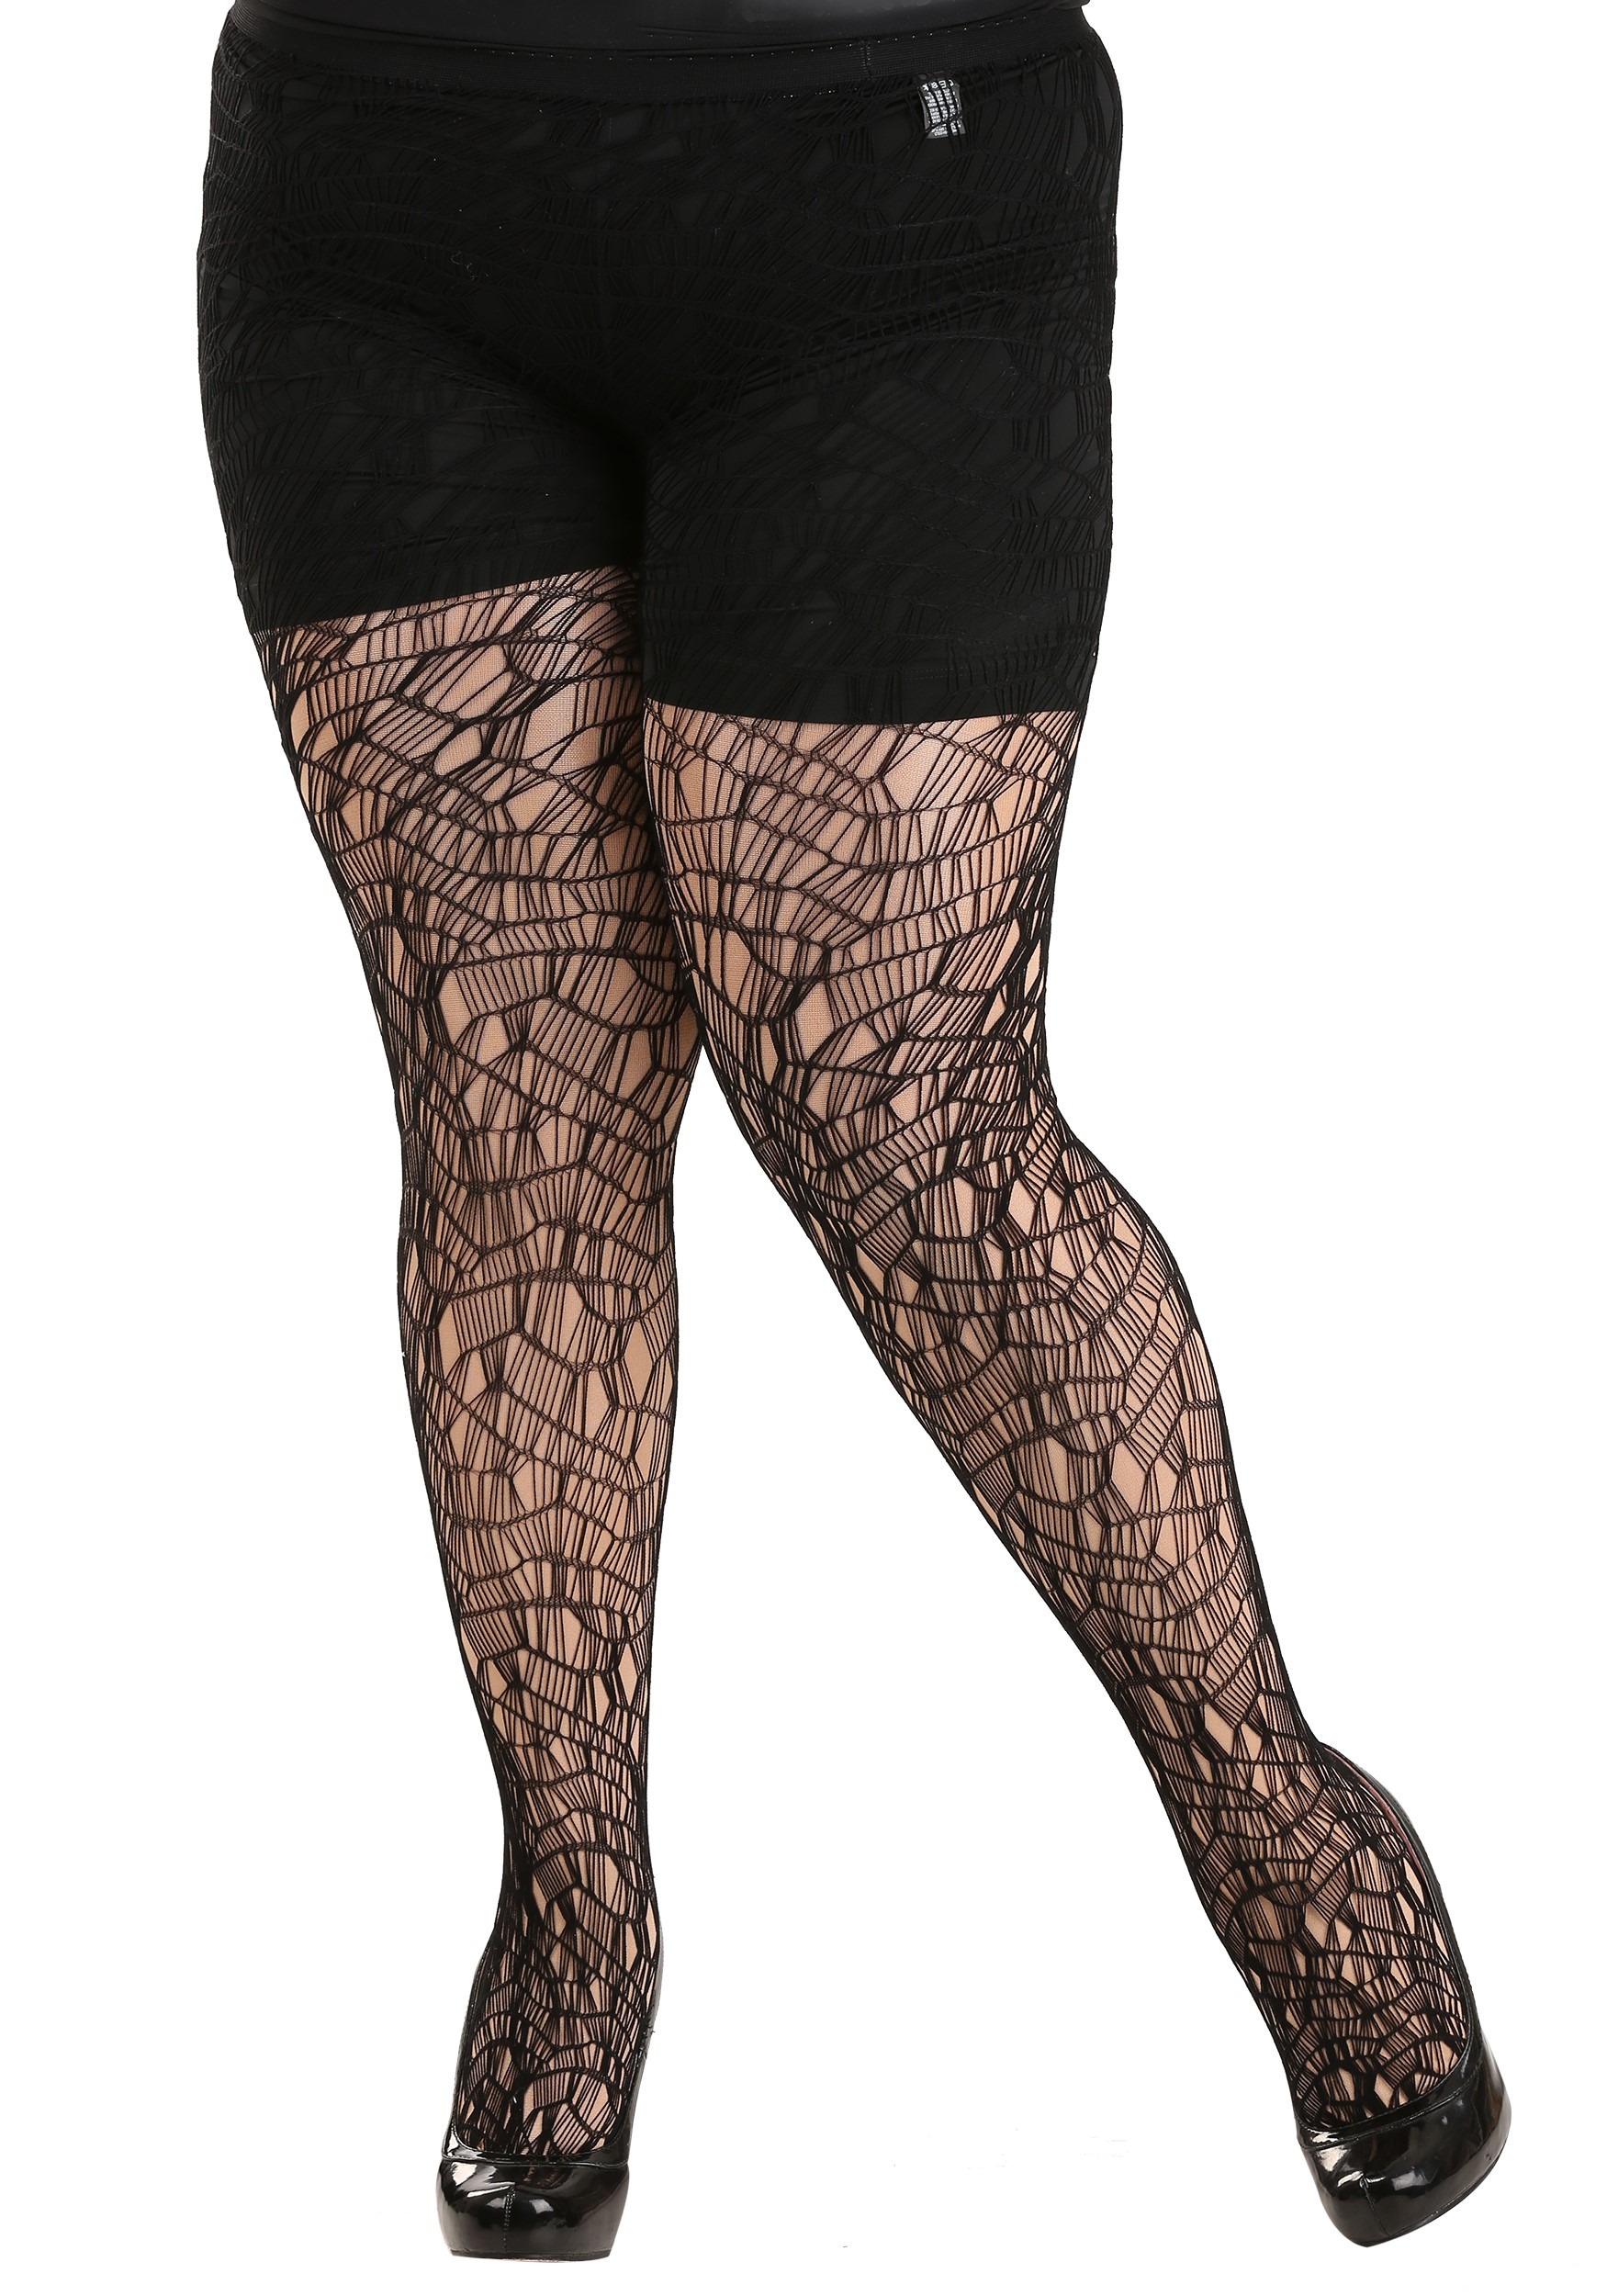 https://images.halloweencostumes.ca/products/47907/1-1/plus-size-ripped-tights.jpg